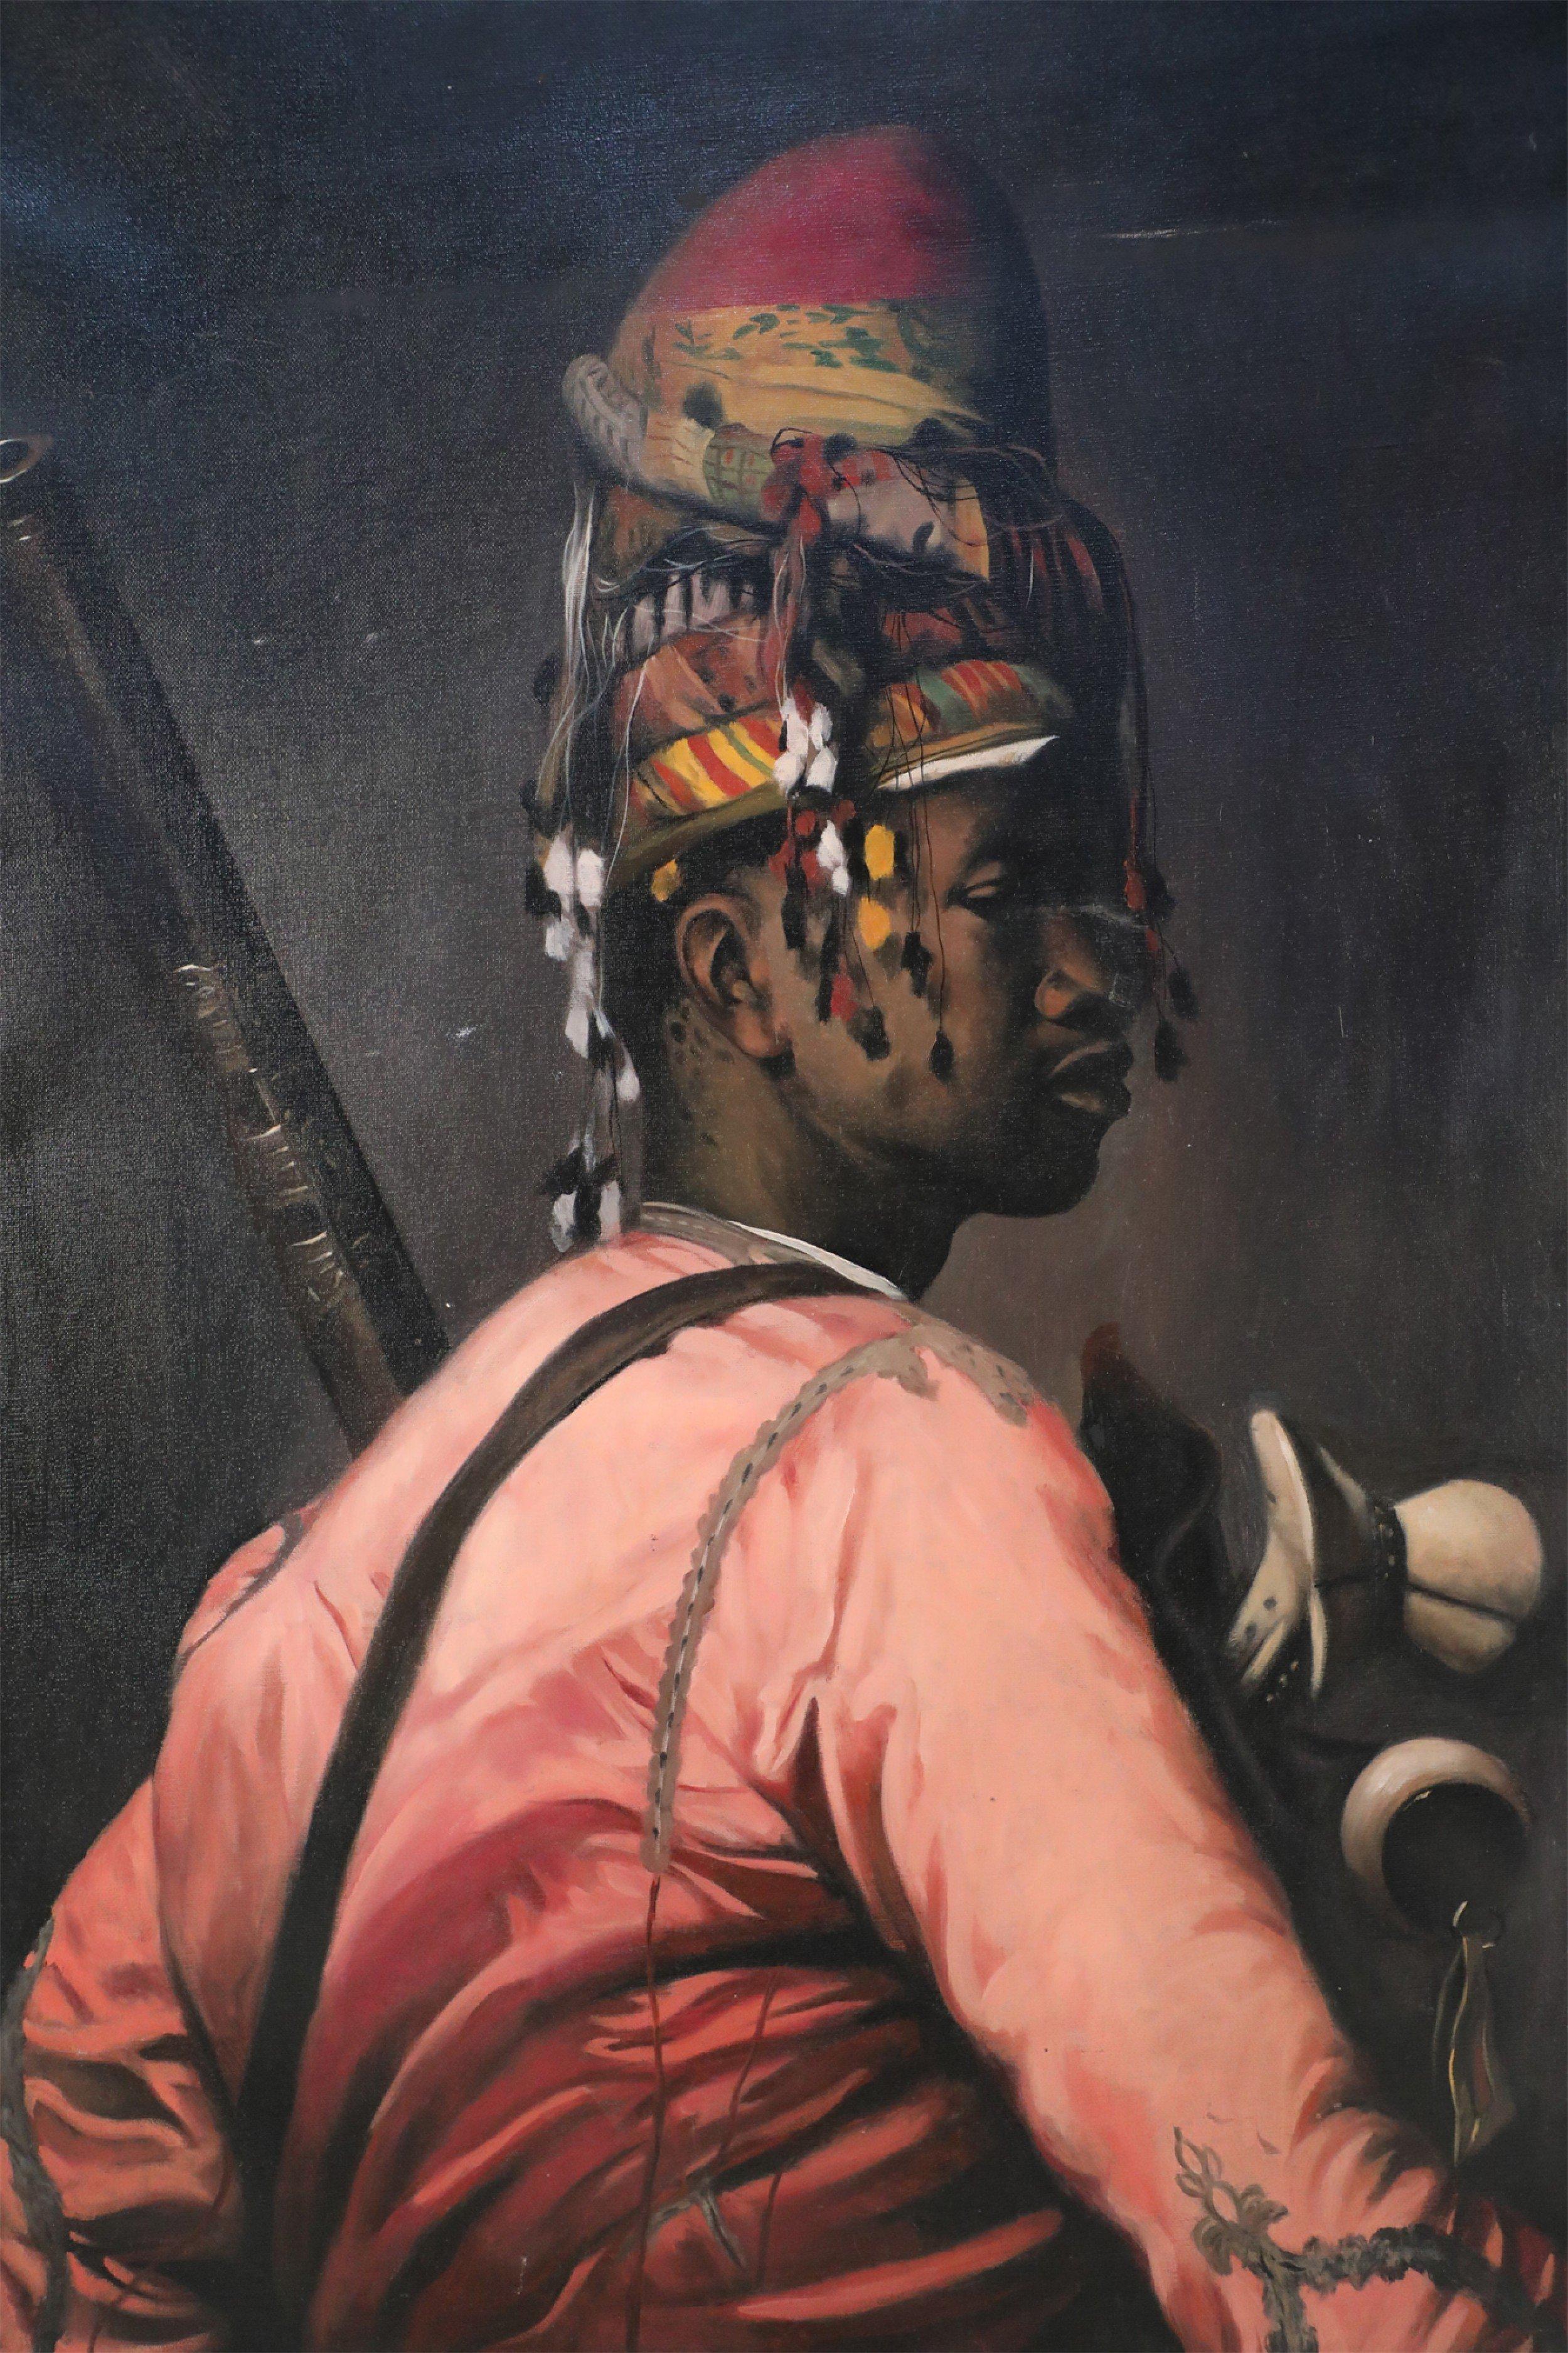 Vintage (20th Century) unframed canvas oil portrait of a man turned away from the viewer and looking over his shoulder to reveal his profile, wearing an embroidered pink outfit with a colorful headrap in reds, yellows, and greens with white accents.